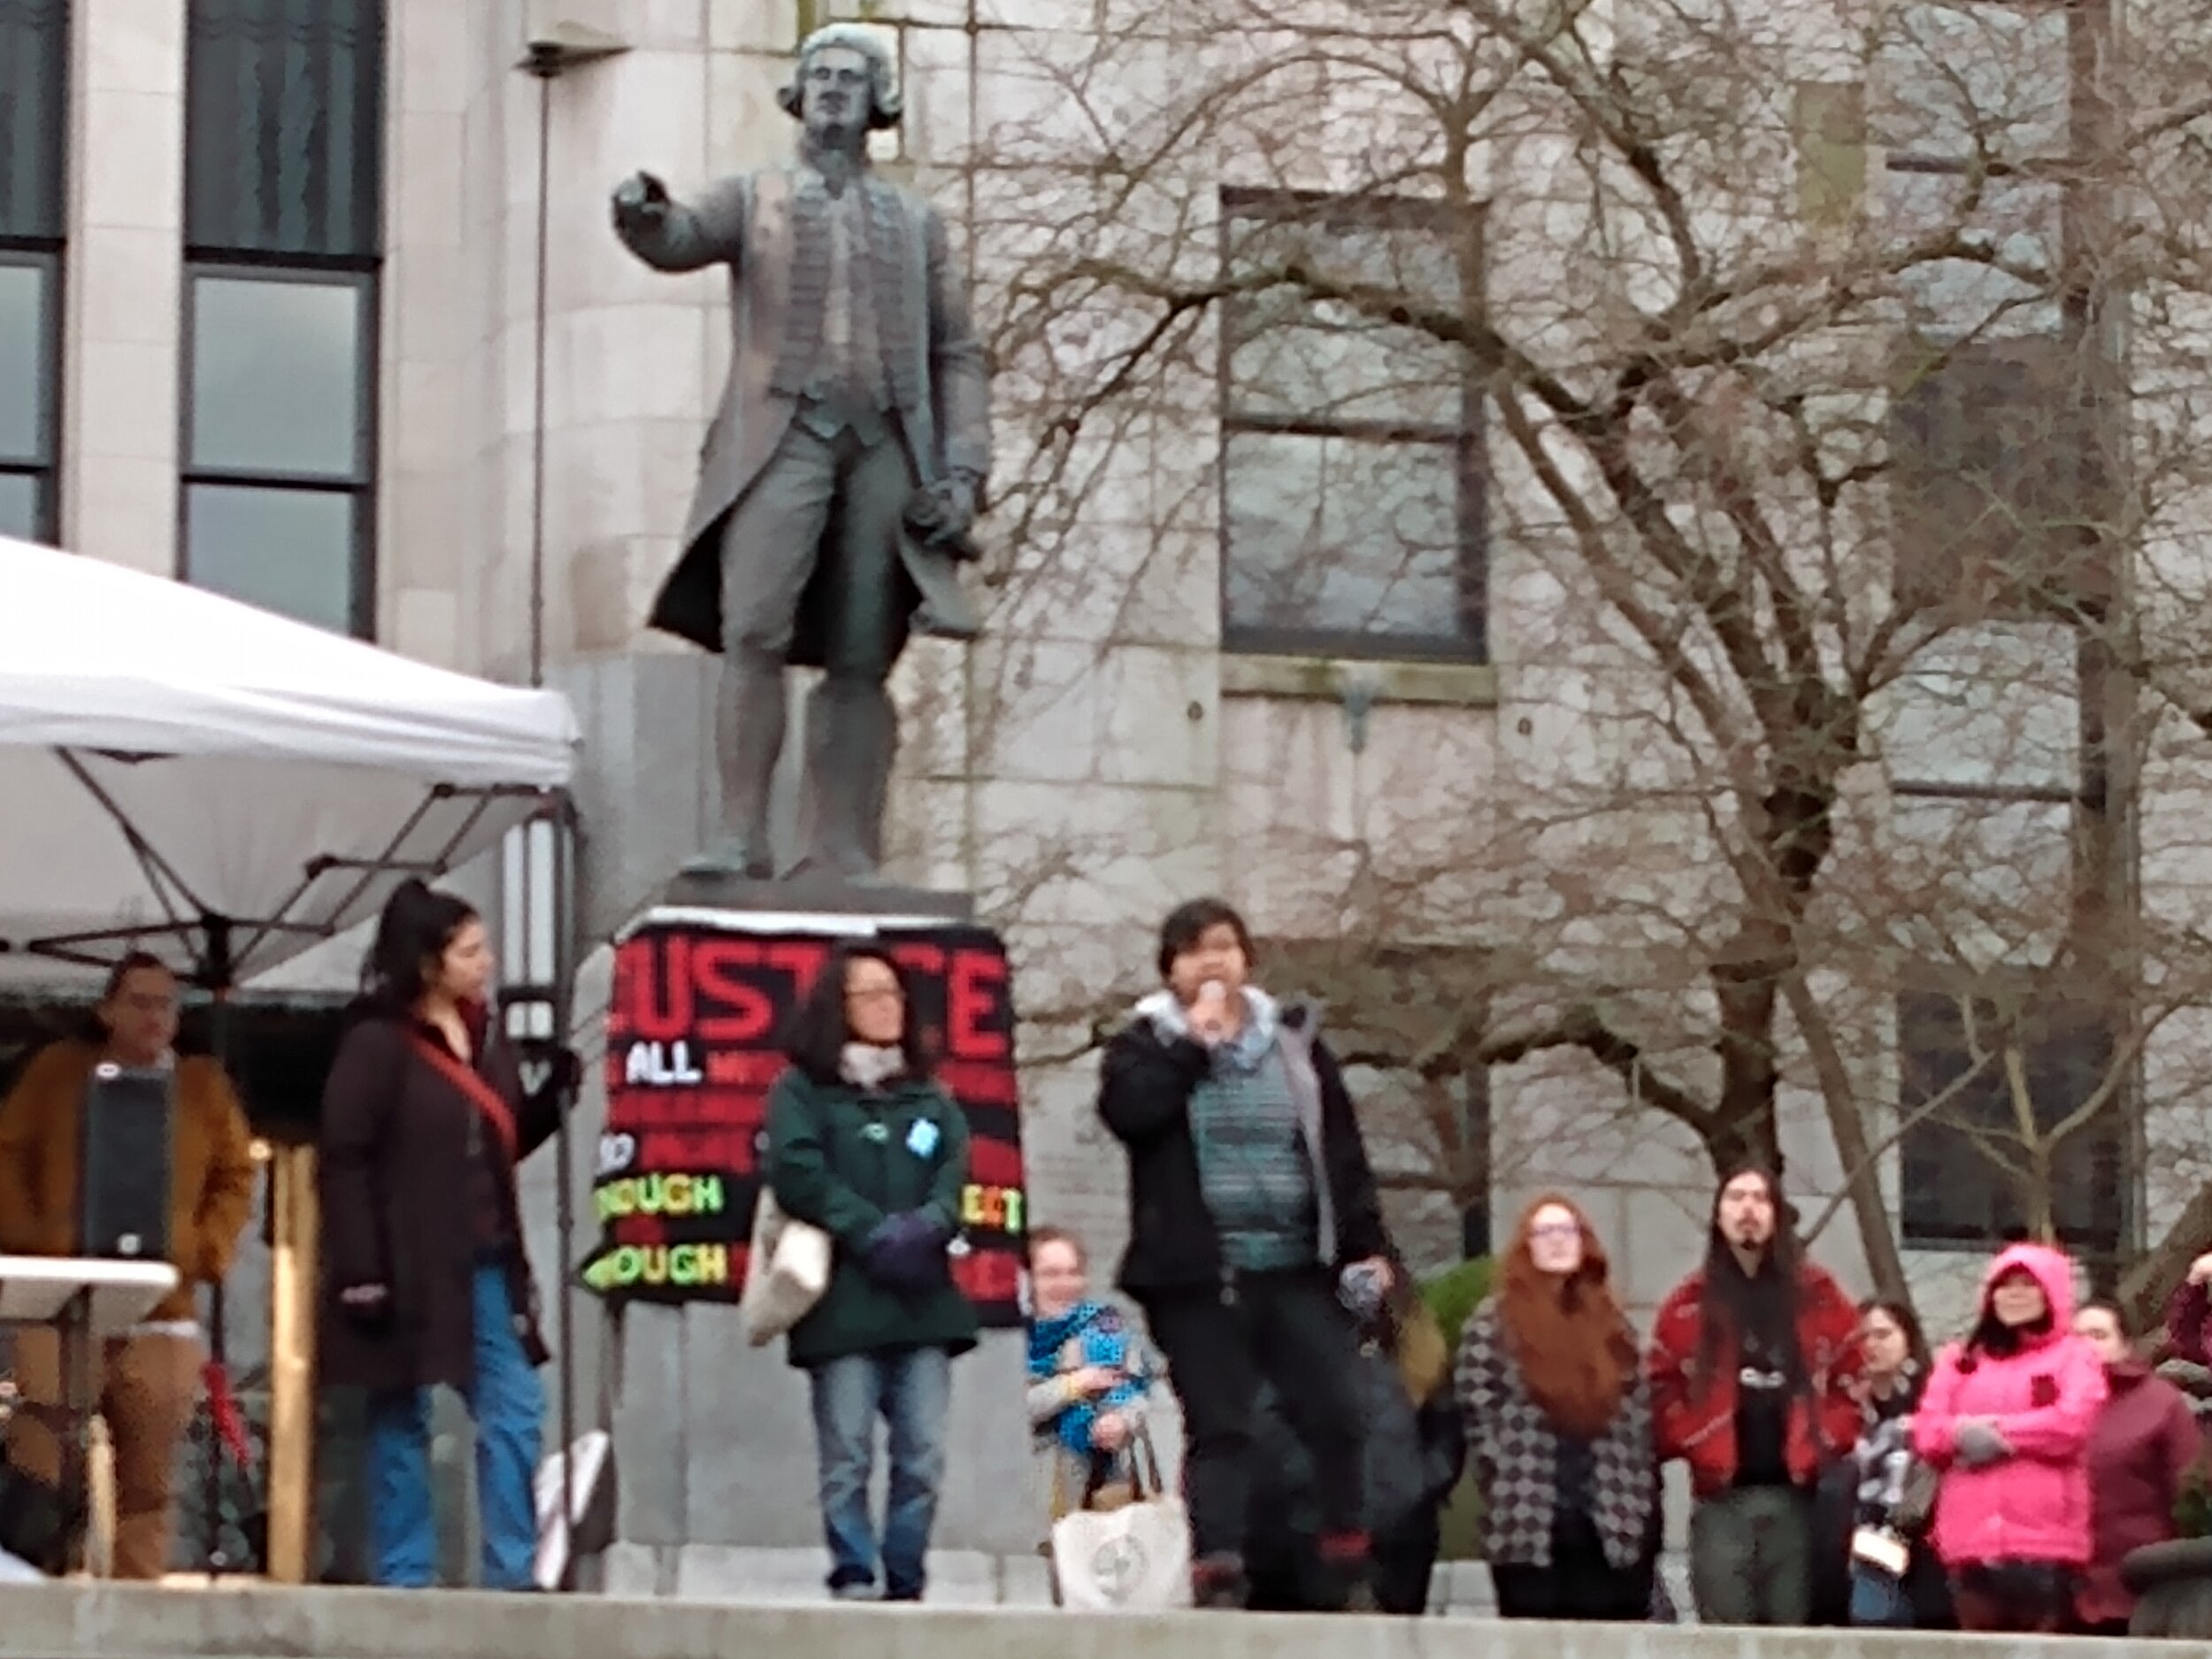 Student walkout, rally, and march in solidarity with Wet'suwet'en - Vancouver, Jan 2020 (13).jpg